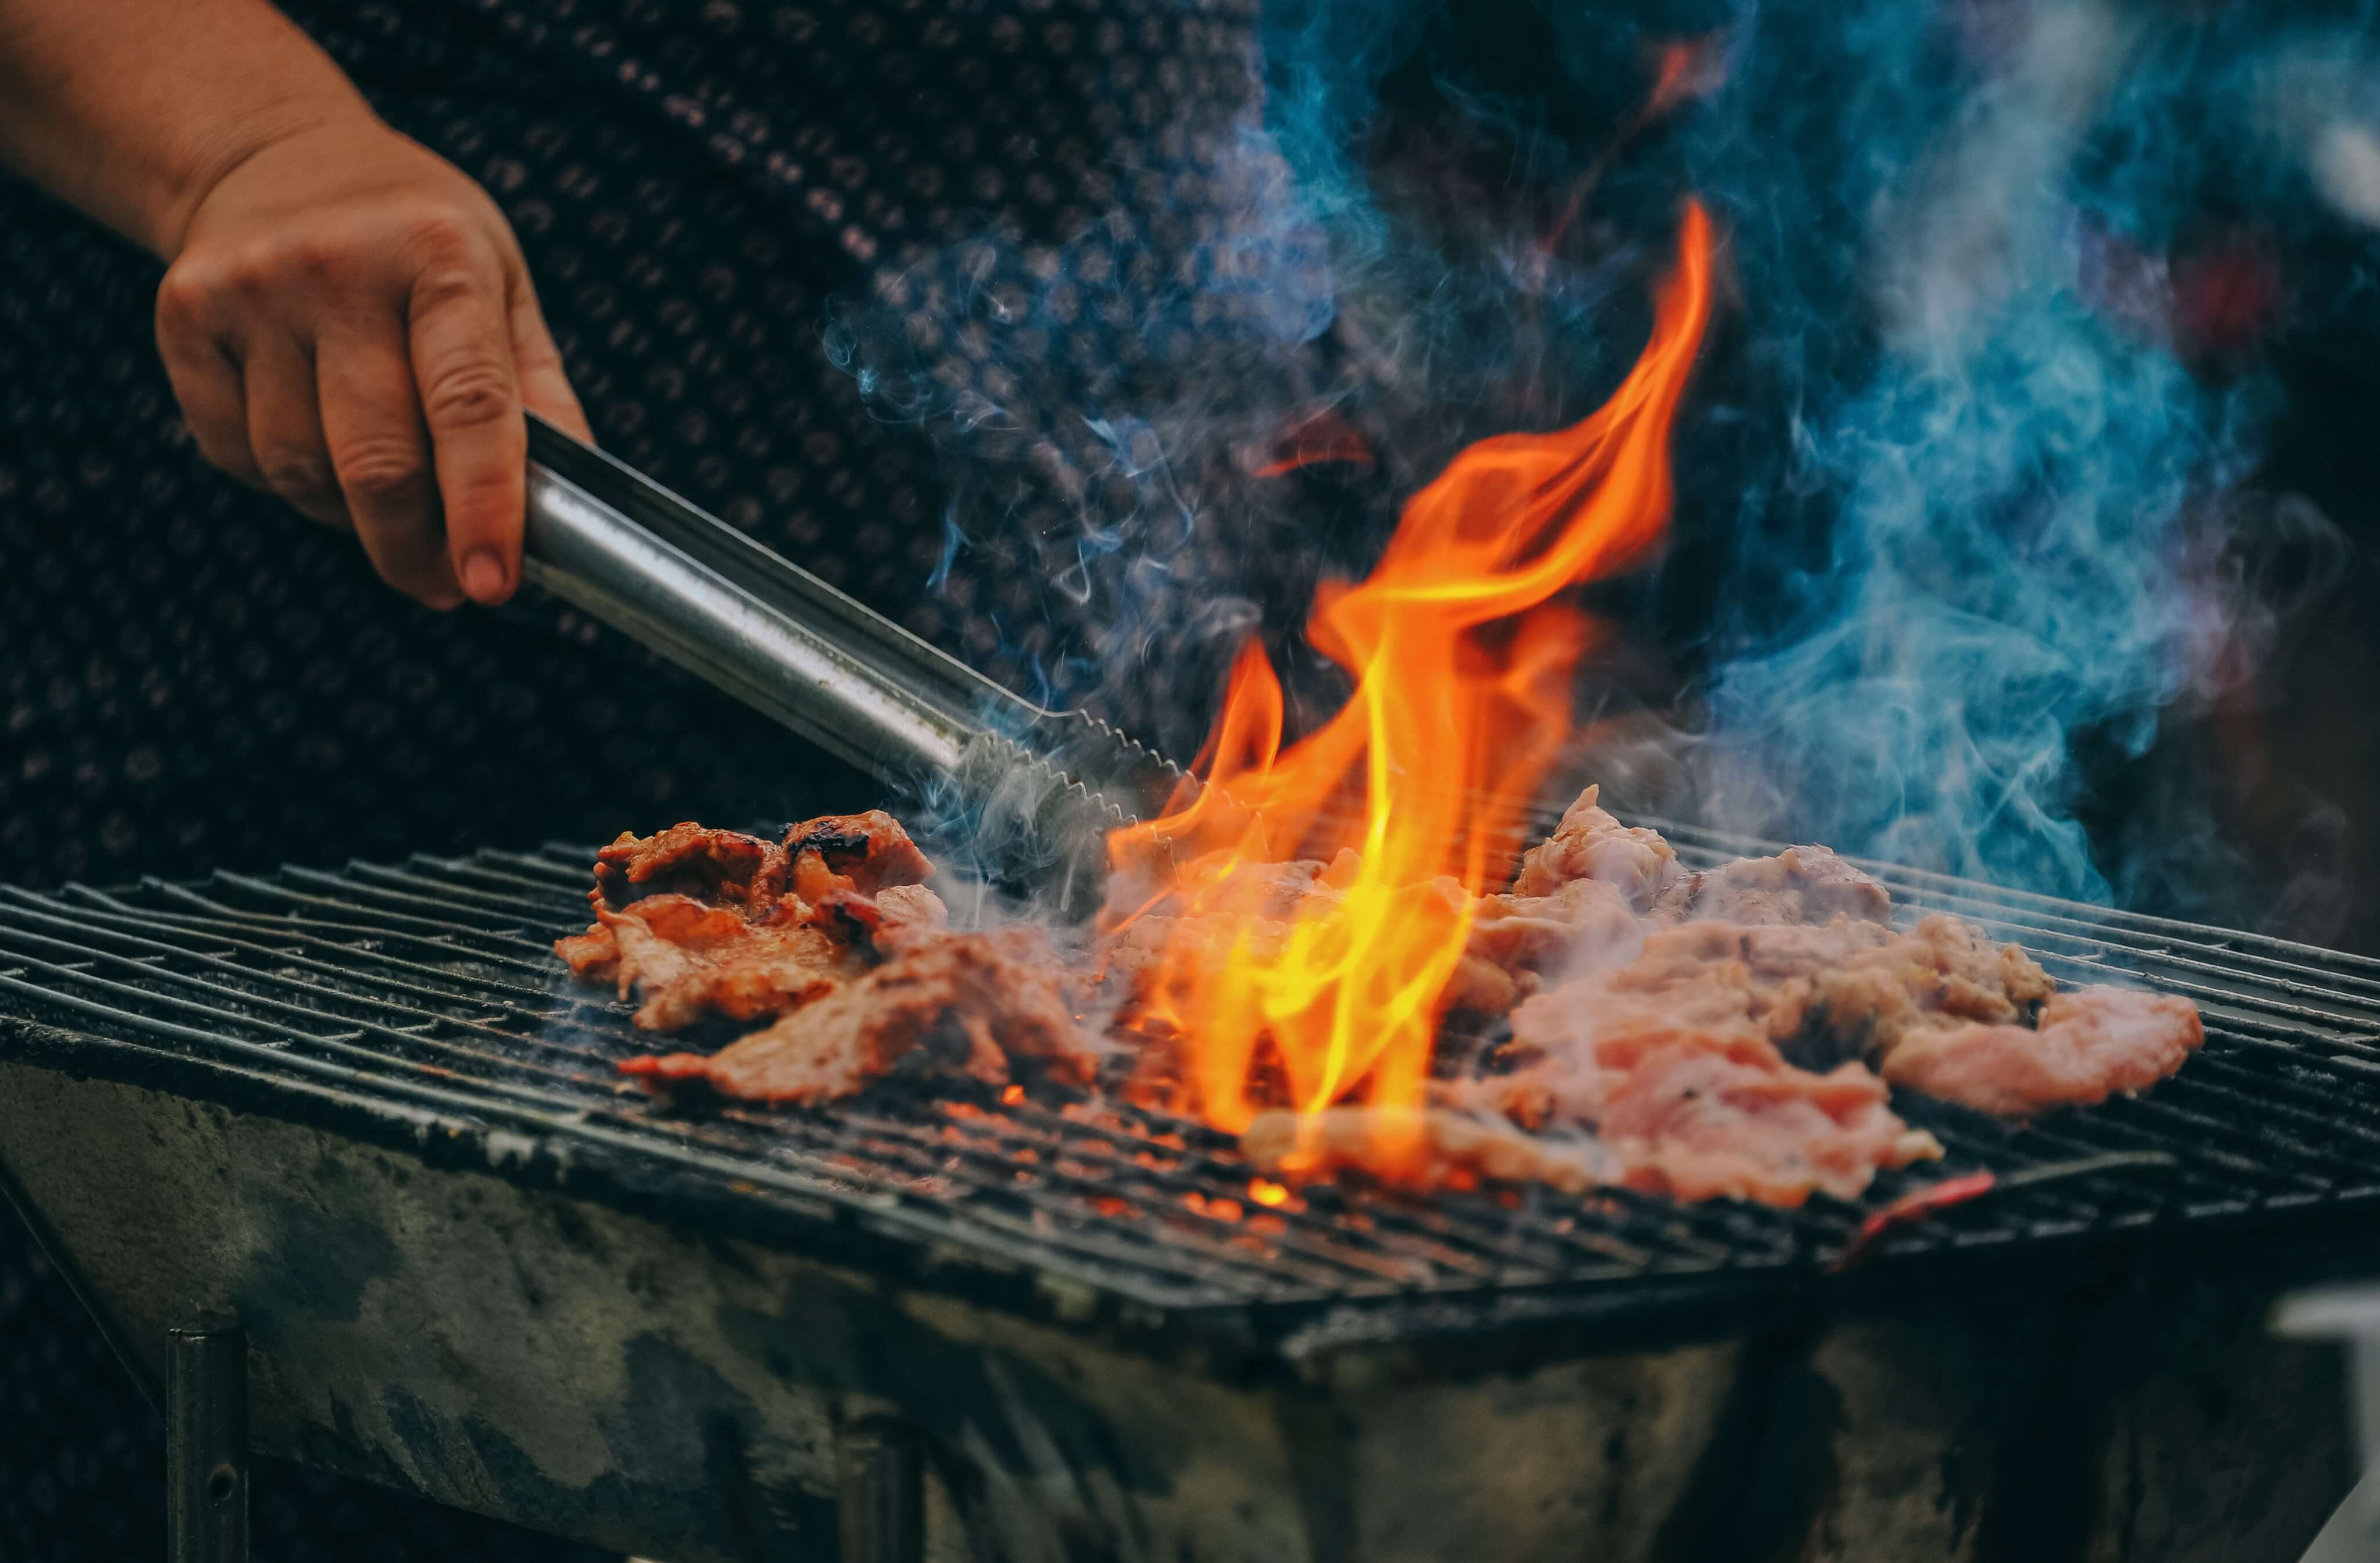 All-time top BBQ tips